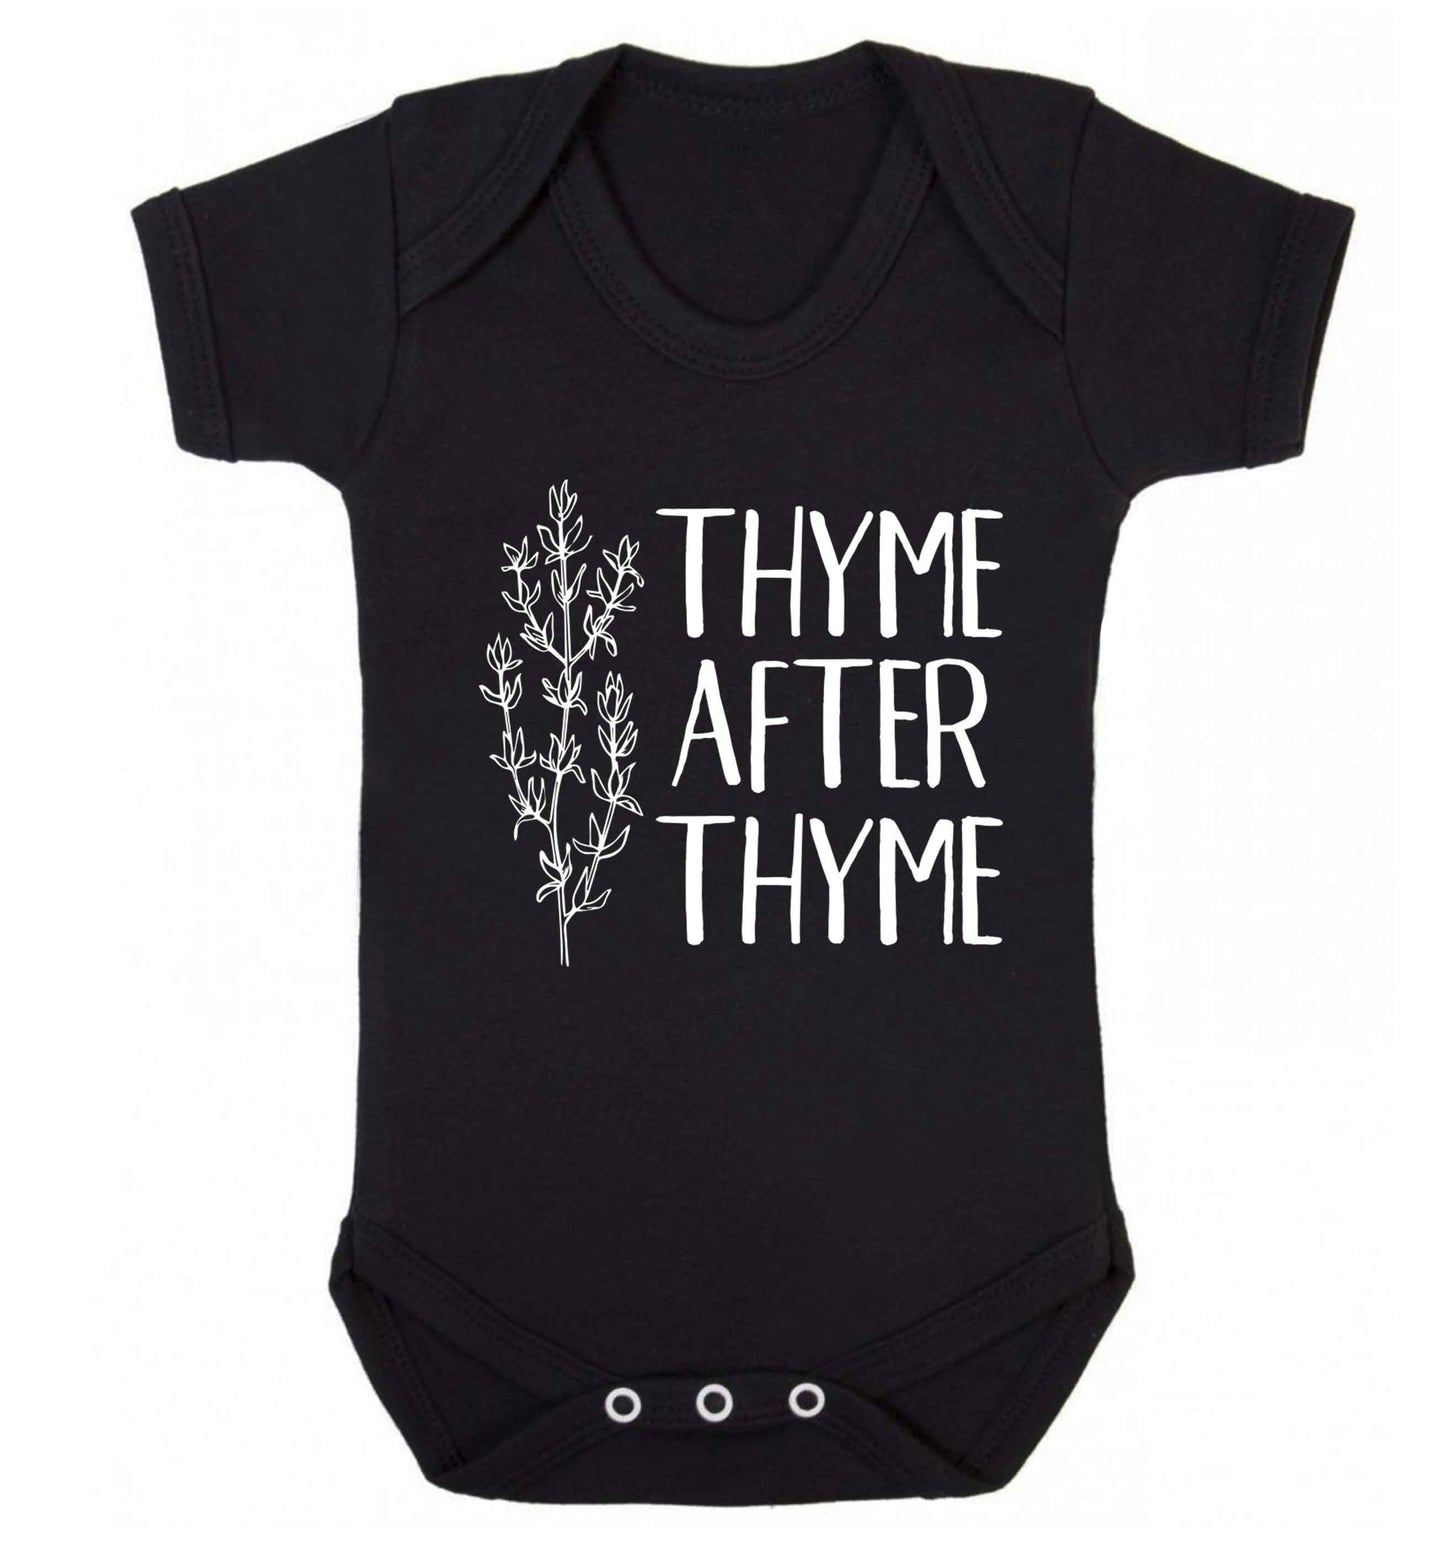 Thyme after thyme Baby Vest black 18-24 months